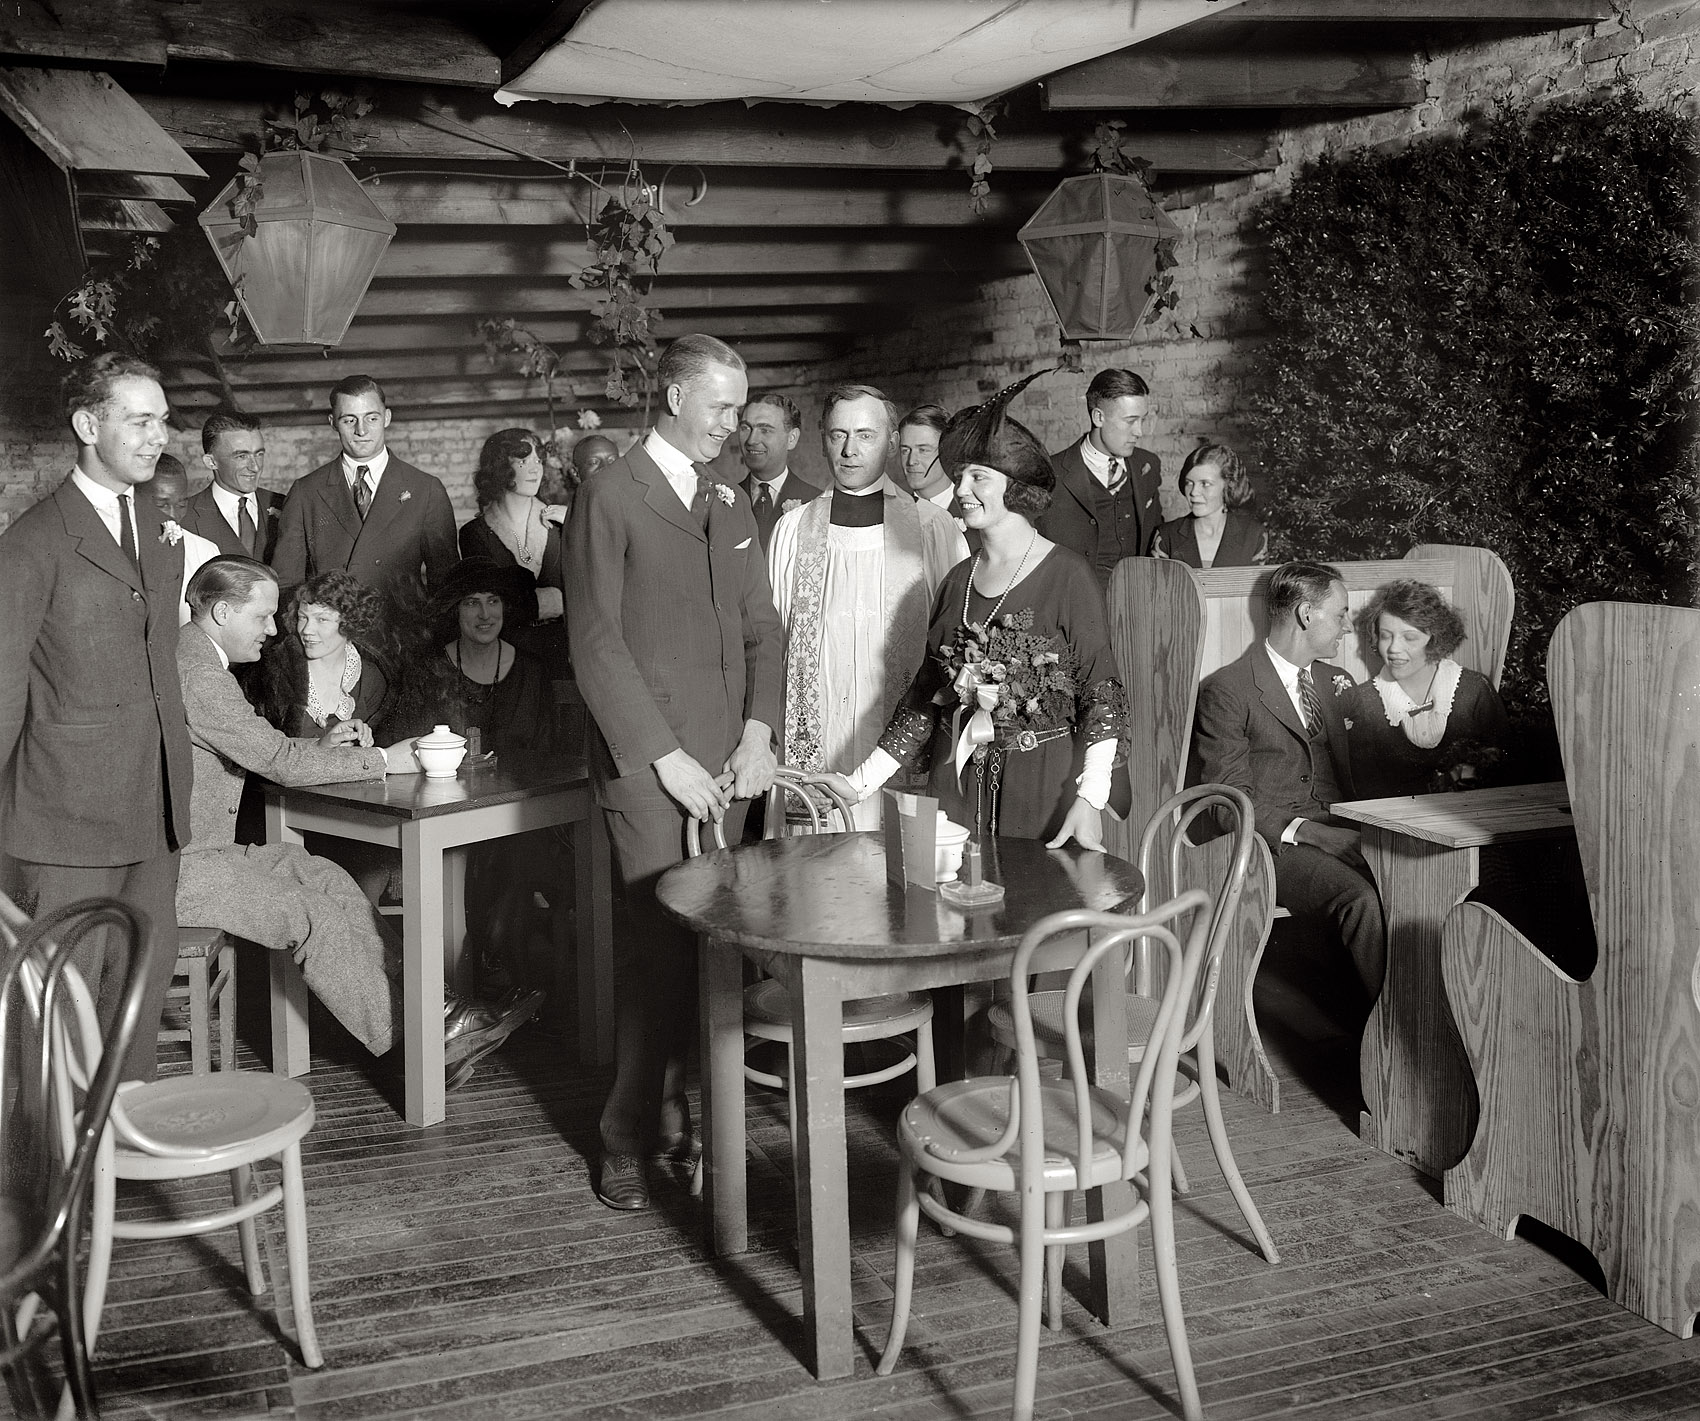 "Better 'Ole Wedding." Informal nuptials circa 1922 at the Better 'Ole, a Greenwich Villagey "bohemian" nightspot in Washington, D.C., that, while short-lived, made its mark. In 1935 the Washington Post called it  "the first real night club of the so-called 'night club era.' " The article continues: "It was started by Charles W. Smith, now the noted black-and-white artist, had a membership charge of $1 and was located on the second floor of a three-story building at 1515 U Street. A hot colored dance orchestra held forth in a room decorated with drapes in a sort of cubist style." More here. National Photo Co. glass negative. View full size.